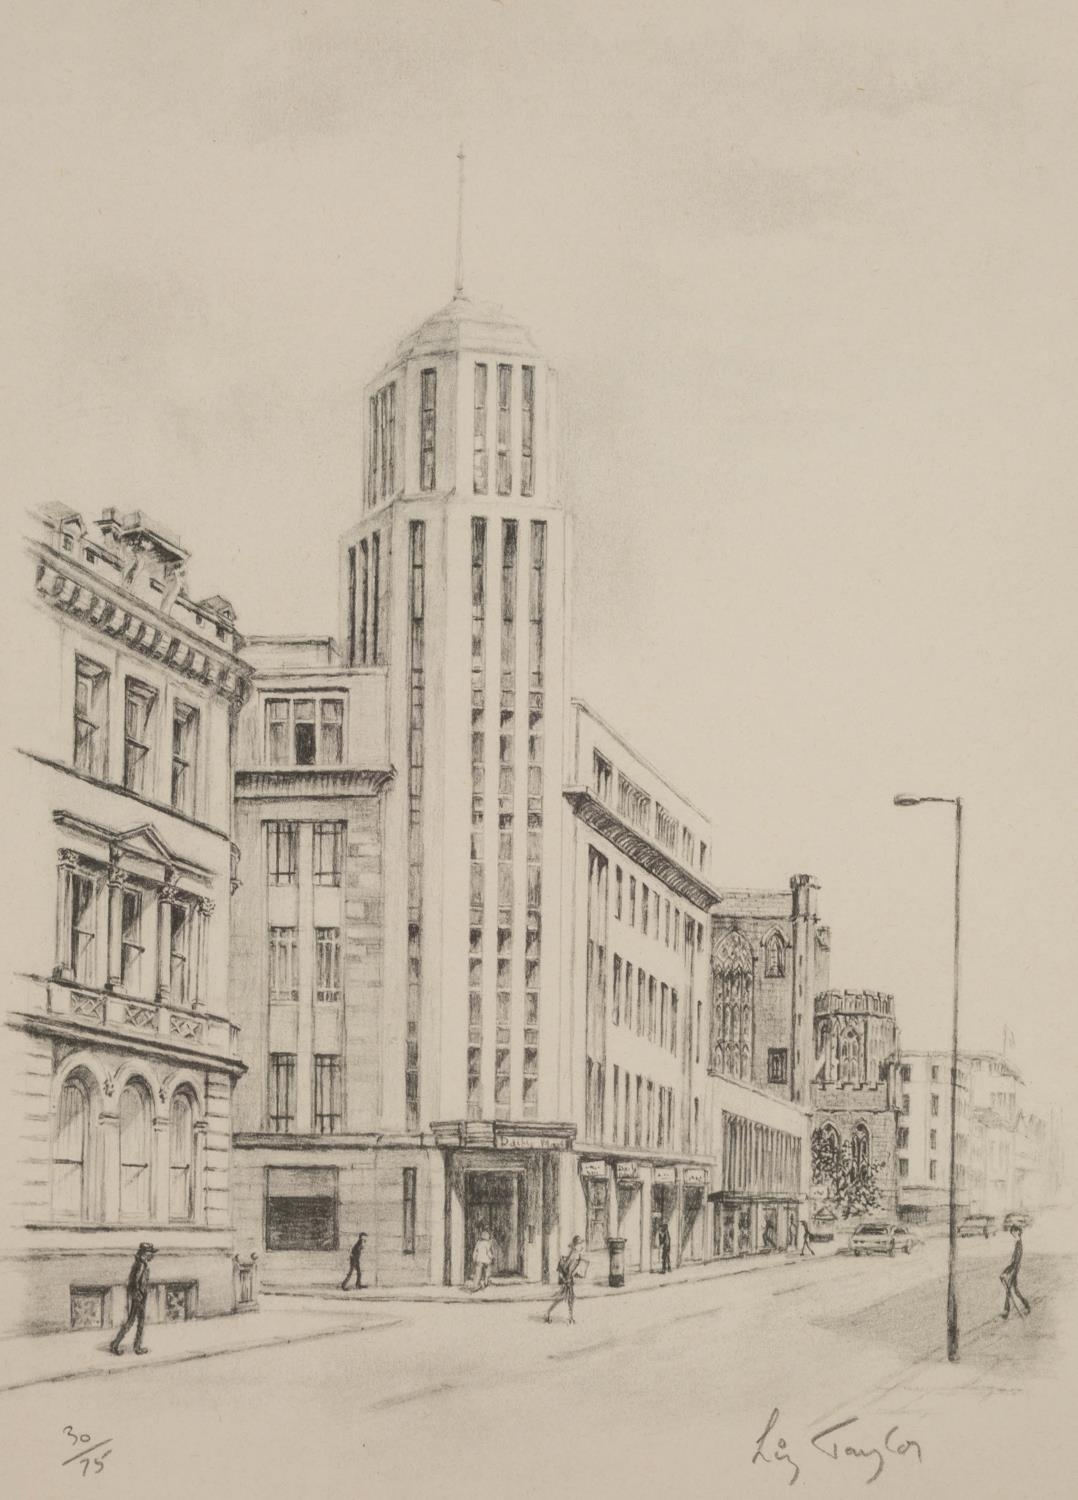 ARTHUR DELANEY (1927 - 1987) ARTIST SIGNED LIMITED EDITION PRINT OF A PENCIL DRAWING Deansgate & - Image 2 of 3